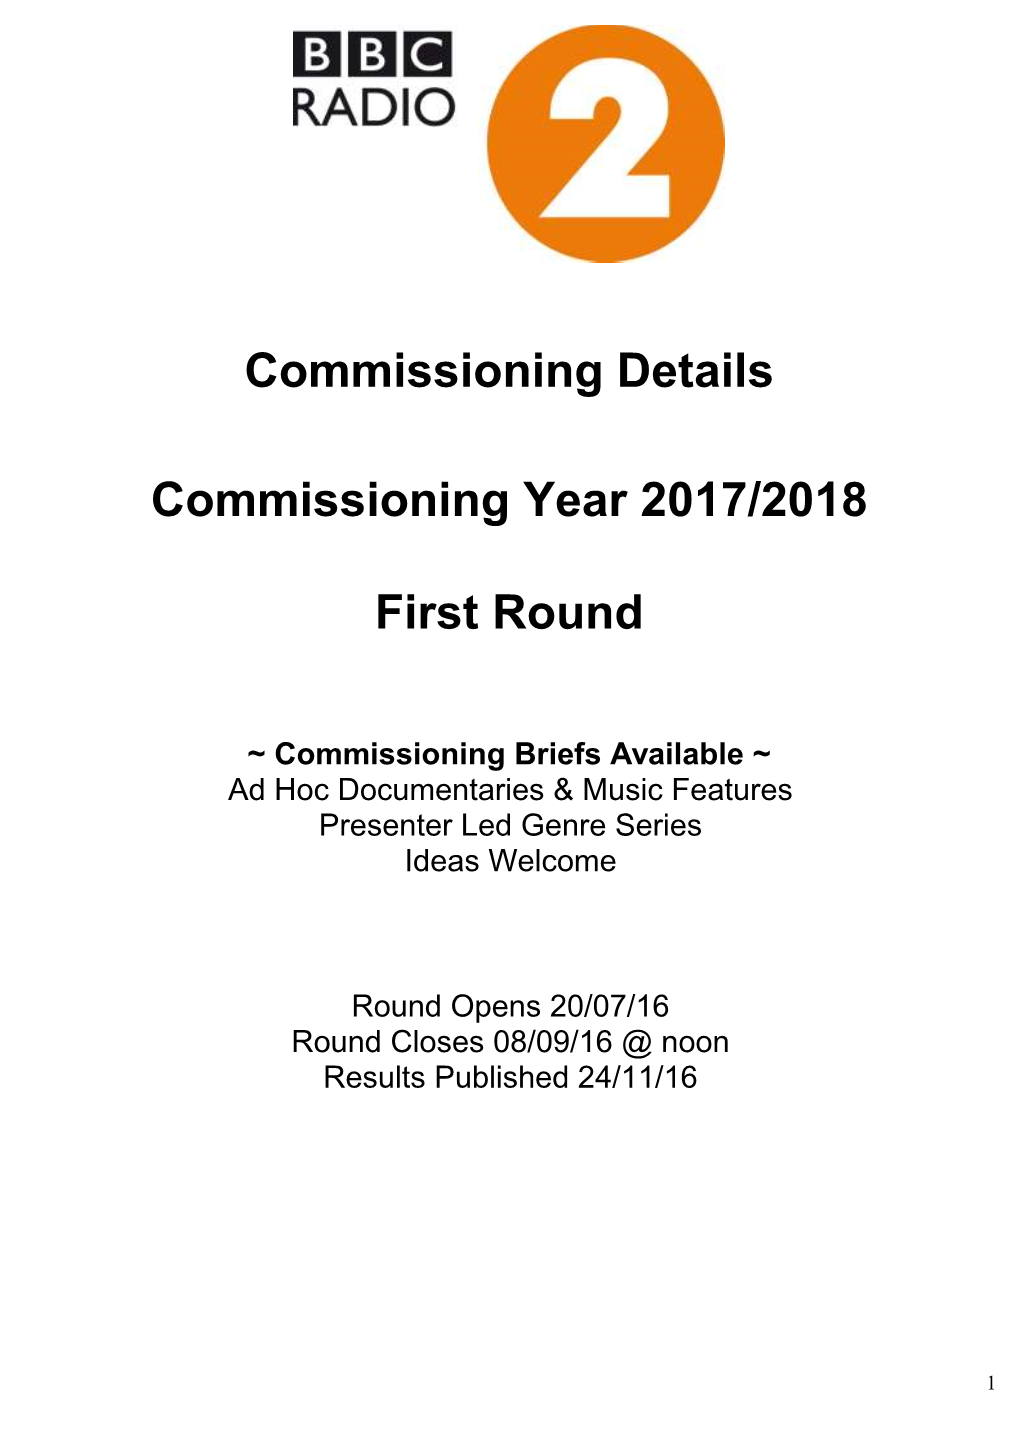 Commissioning Details Commissioning Year 2017/2018